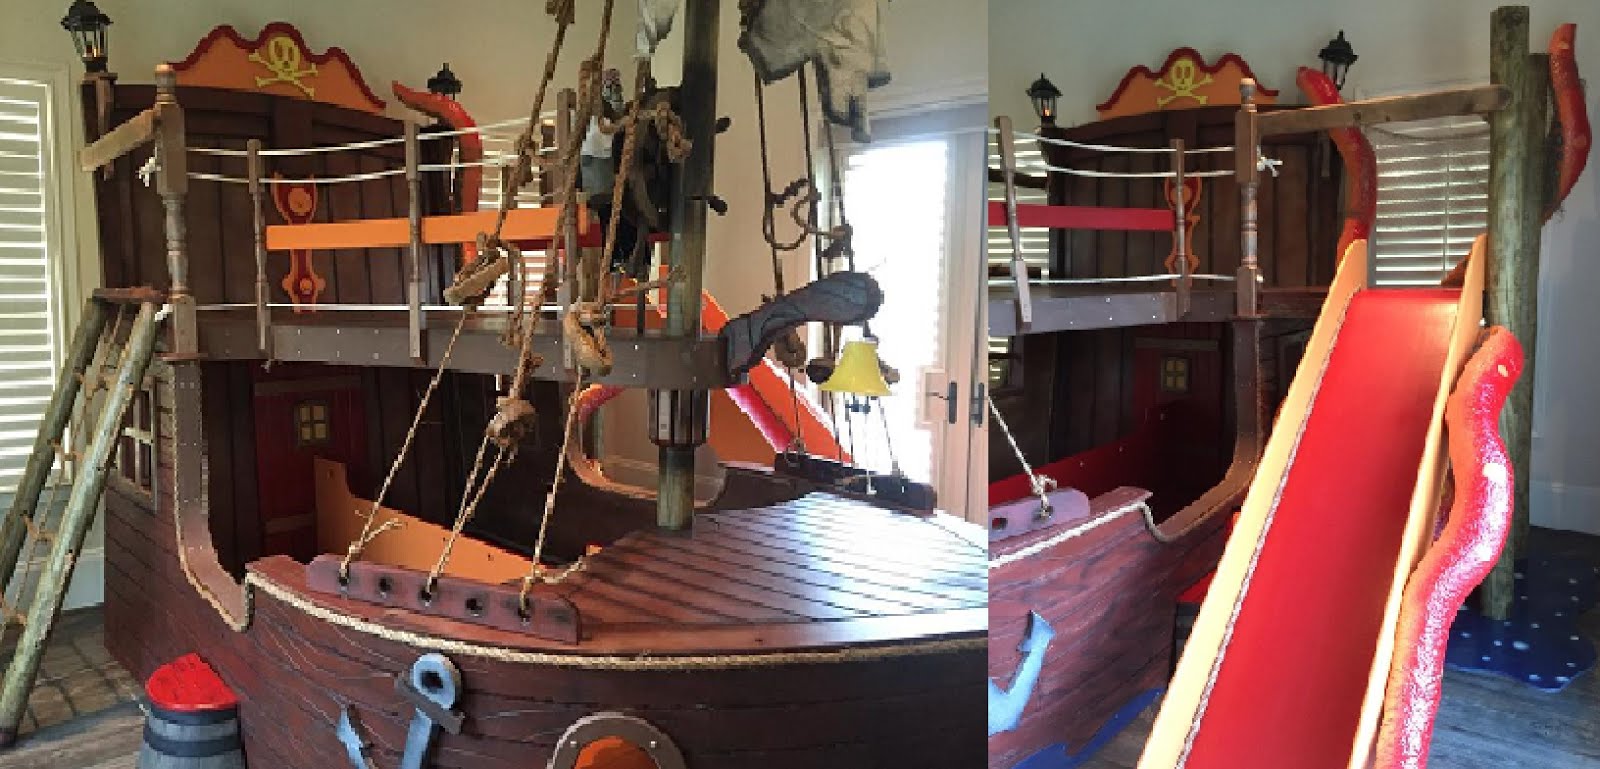 And for those who do, here's the complete pirate ship for $18,000 at Etsy ~